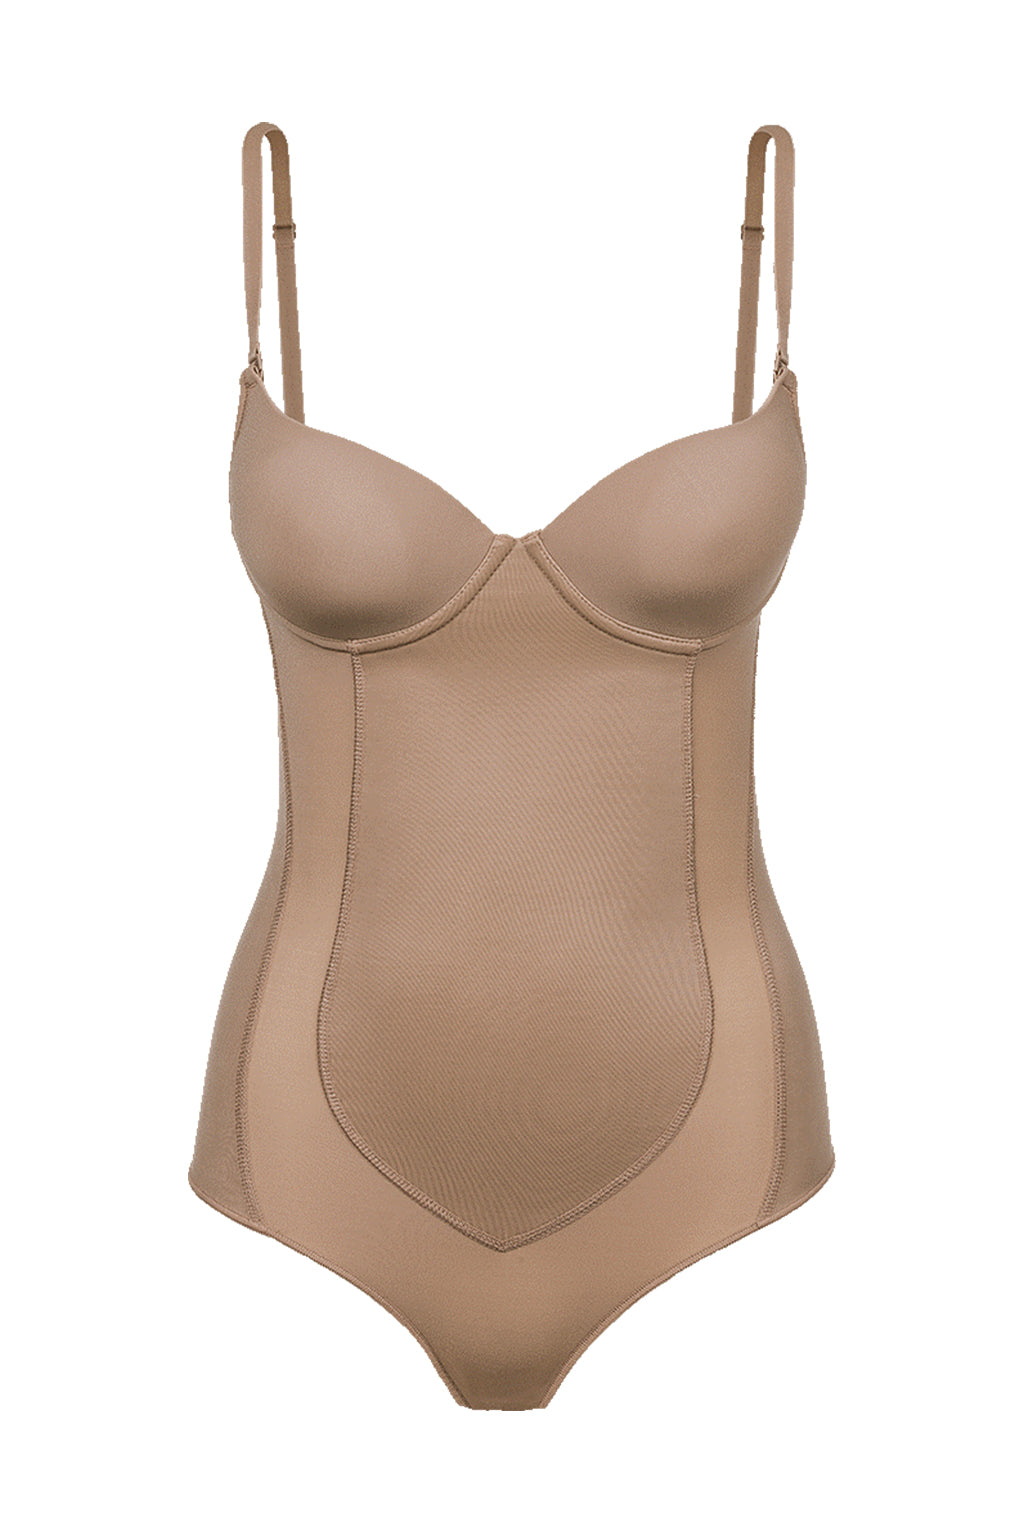 Sculpting body with padded cups for €49.99 - Bodies & Bustiers - Hunkemöller